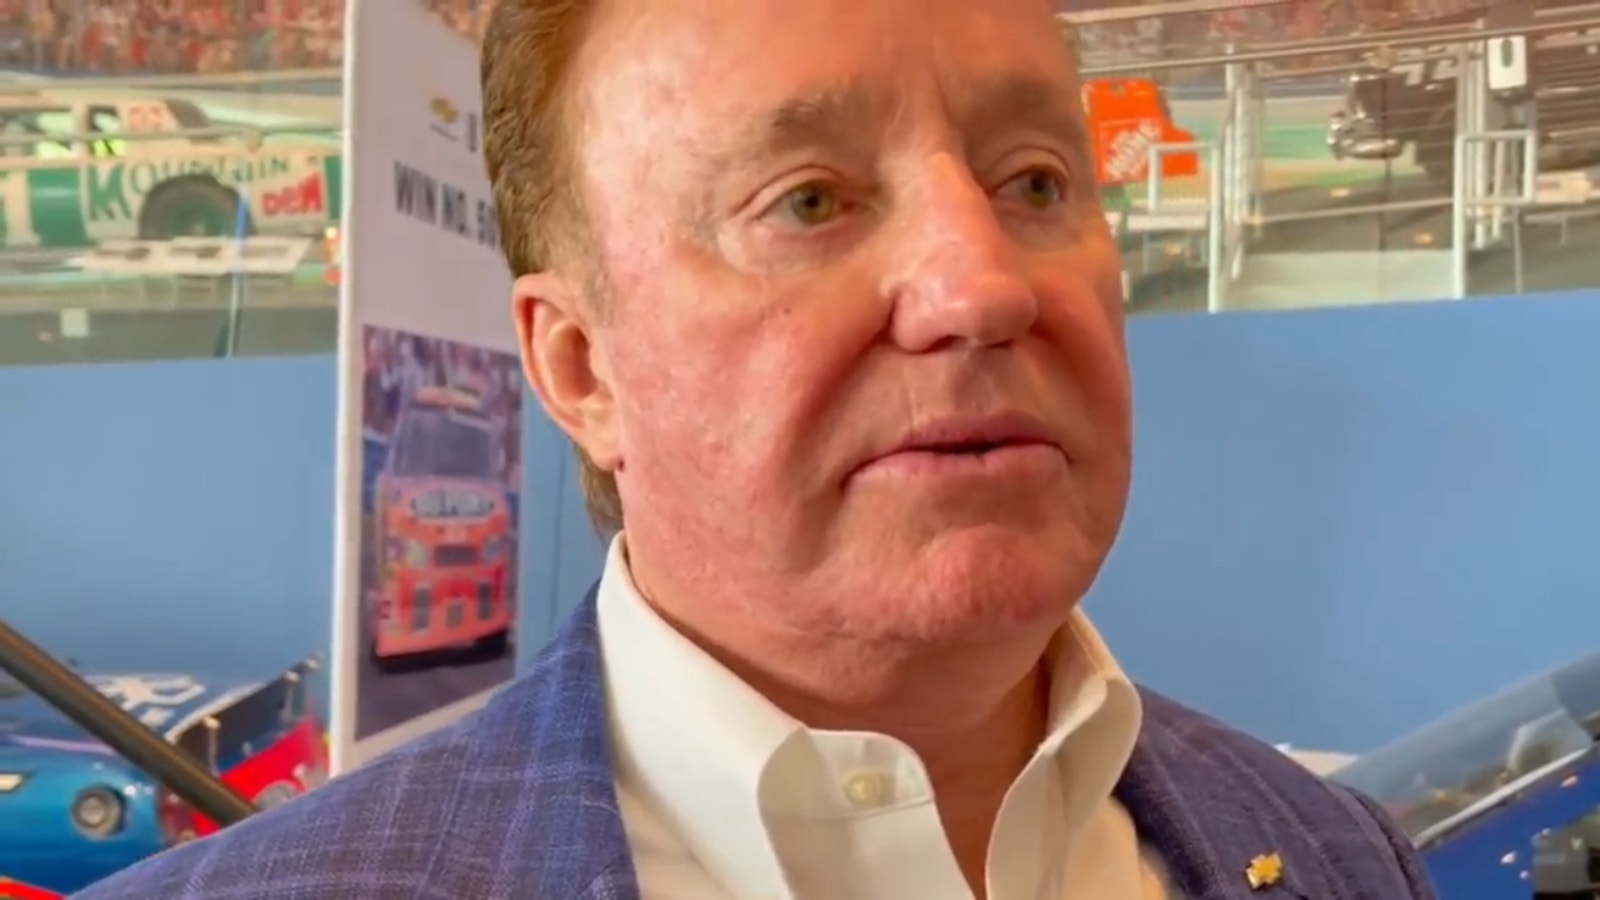 Richard Childress on why he didn't let Reddick leave early